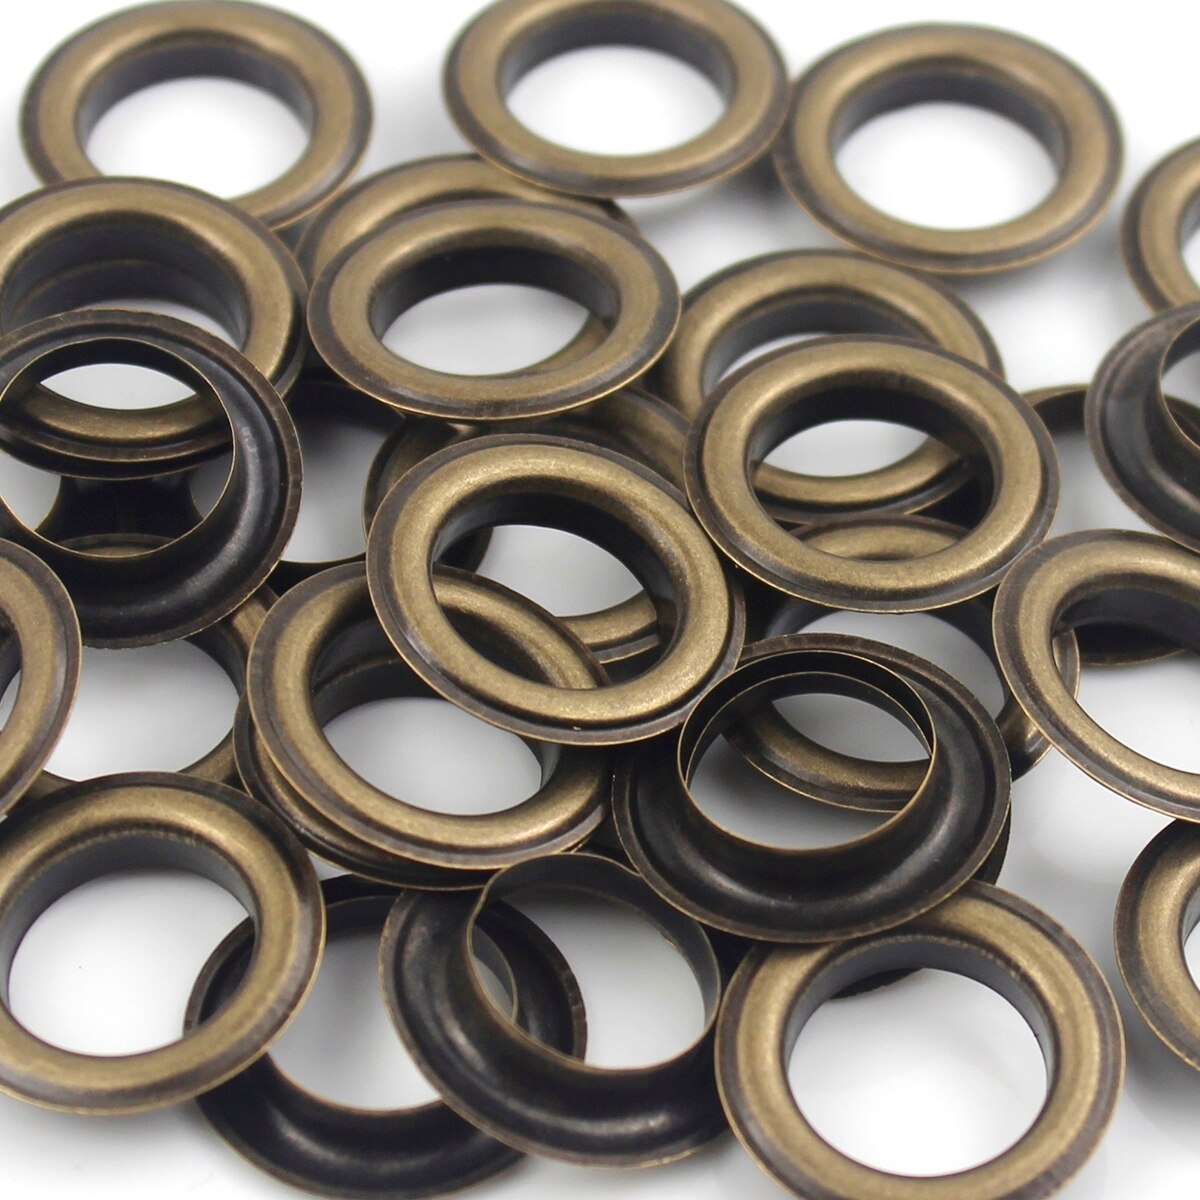 Number 28 Eyelets (in packs of 100)